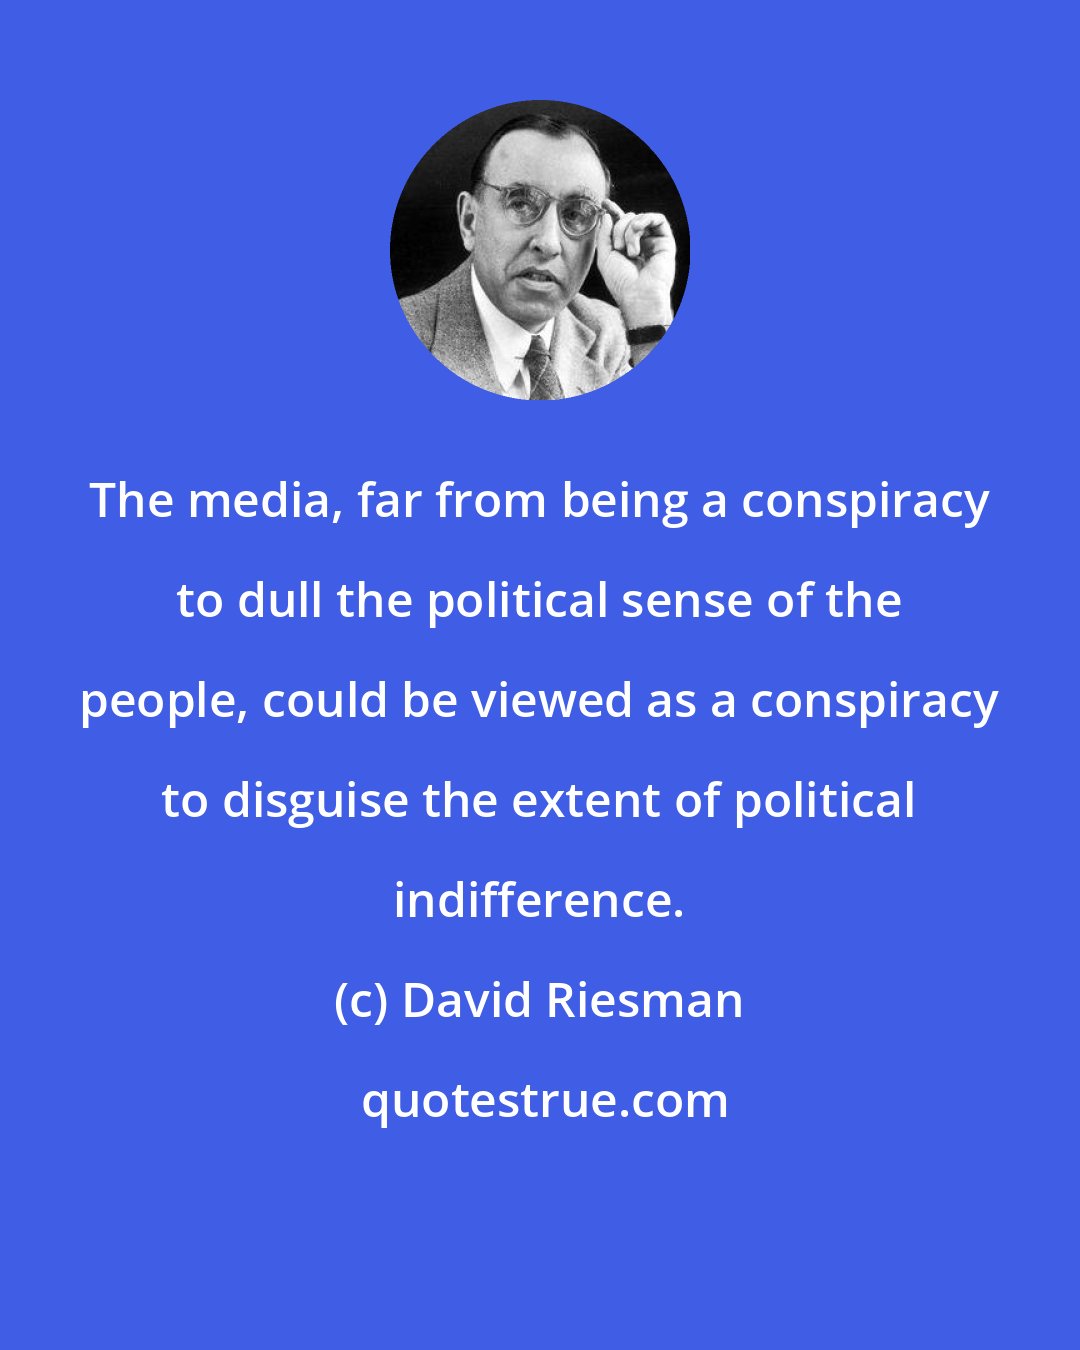 David Riesman: The media, far from being a conspiracy to dull the political sense of the people, could be viewed as a conspiracy to disguise the extent of political indifference.